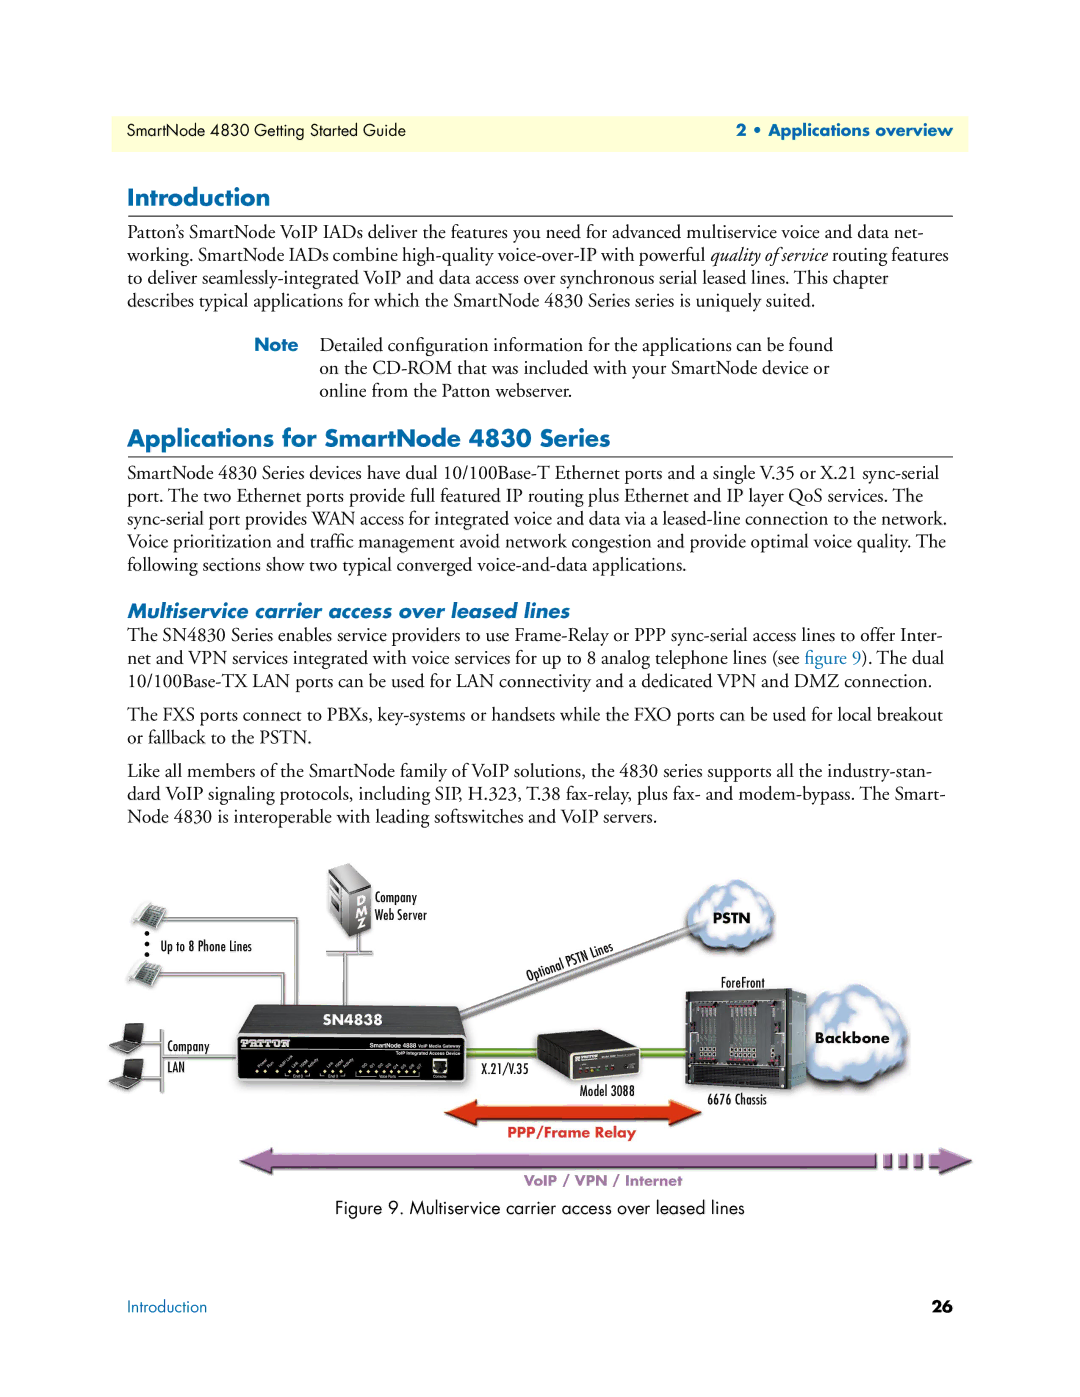 Patton electronic Introduction, Applications for SmartNode 4830 Series, Multiservice carrier access over leased lines 